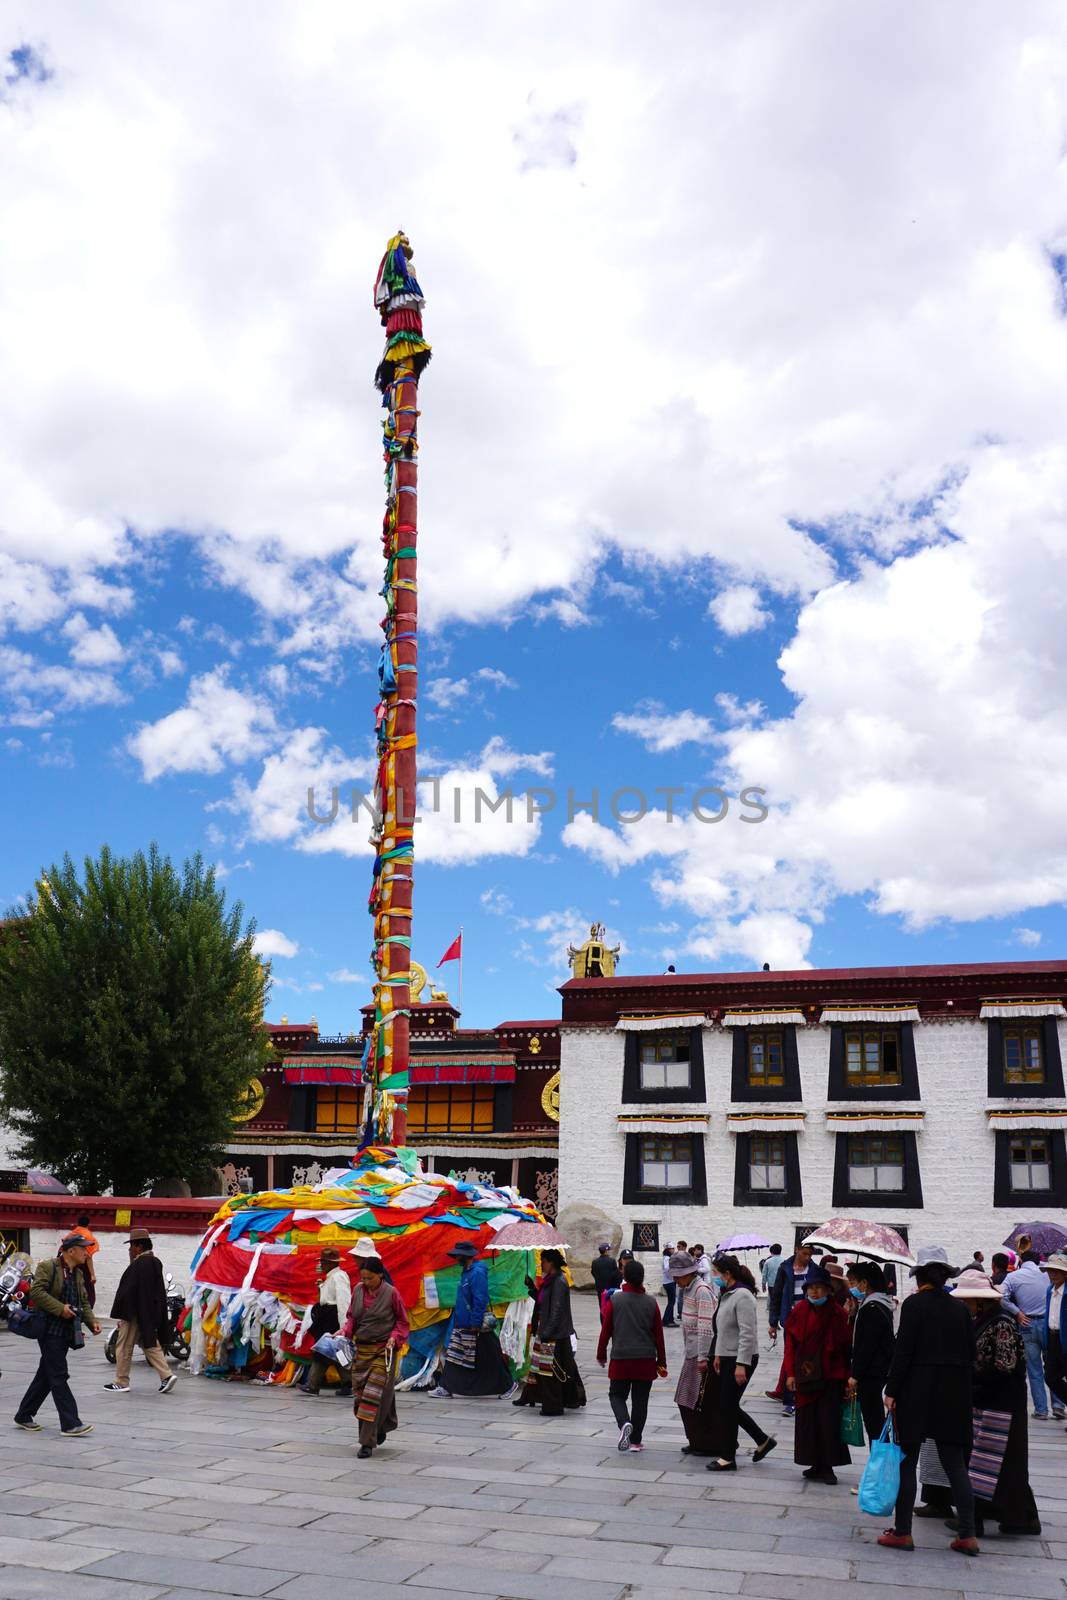 Tibet, China - May 31, 2017. People on main square in Lhasa, Tibet, China. Tibet is a historical region covering much of the Tibetan Plateau in Central Asia.